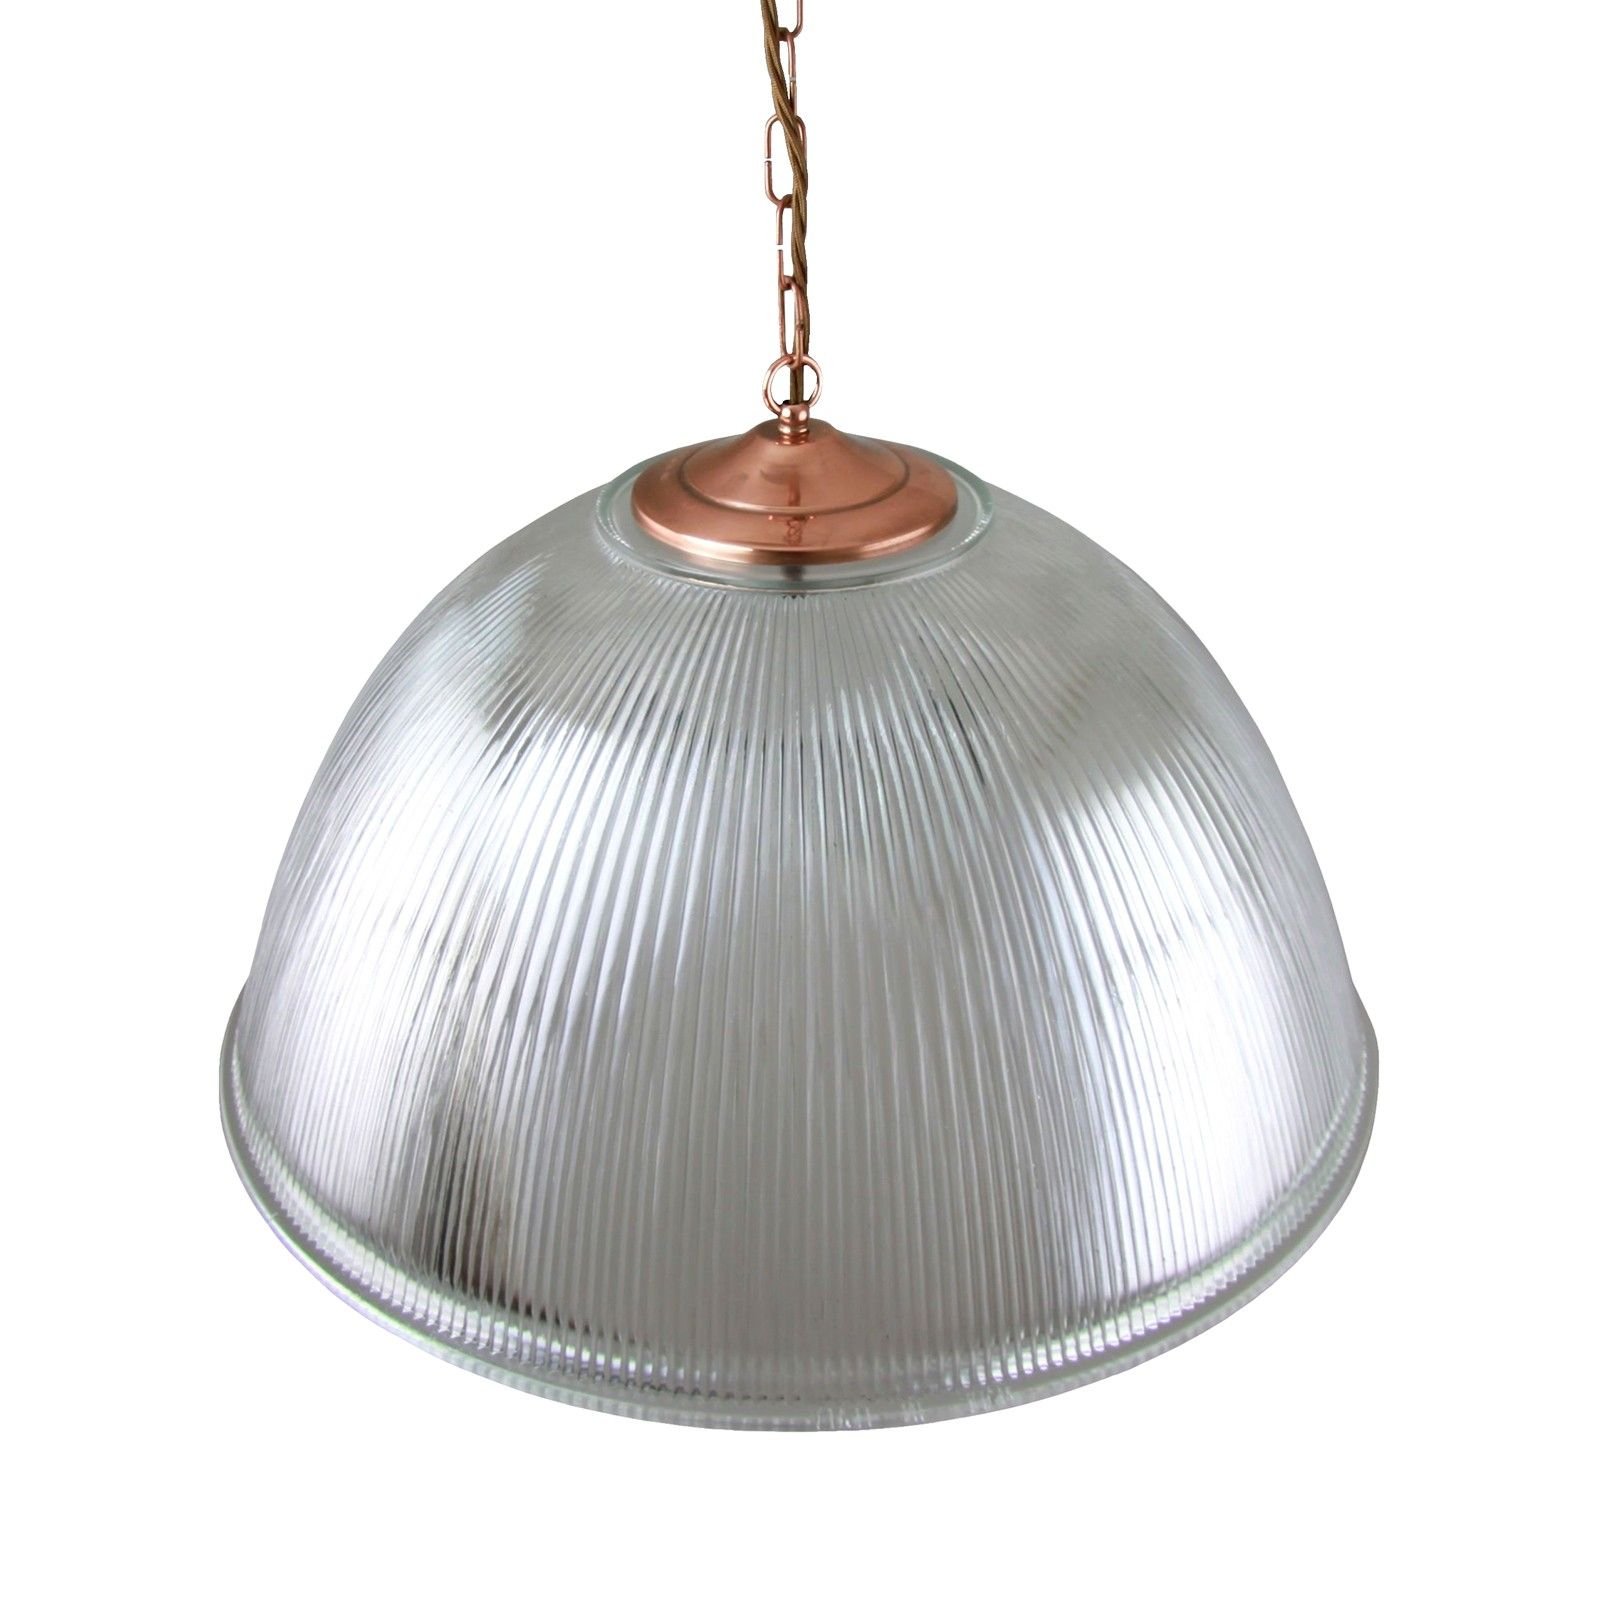 Large dome ceiling light in copper